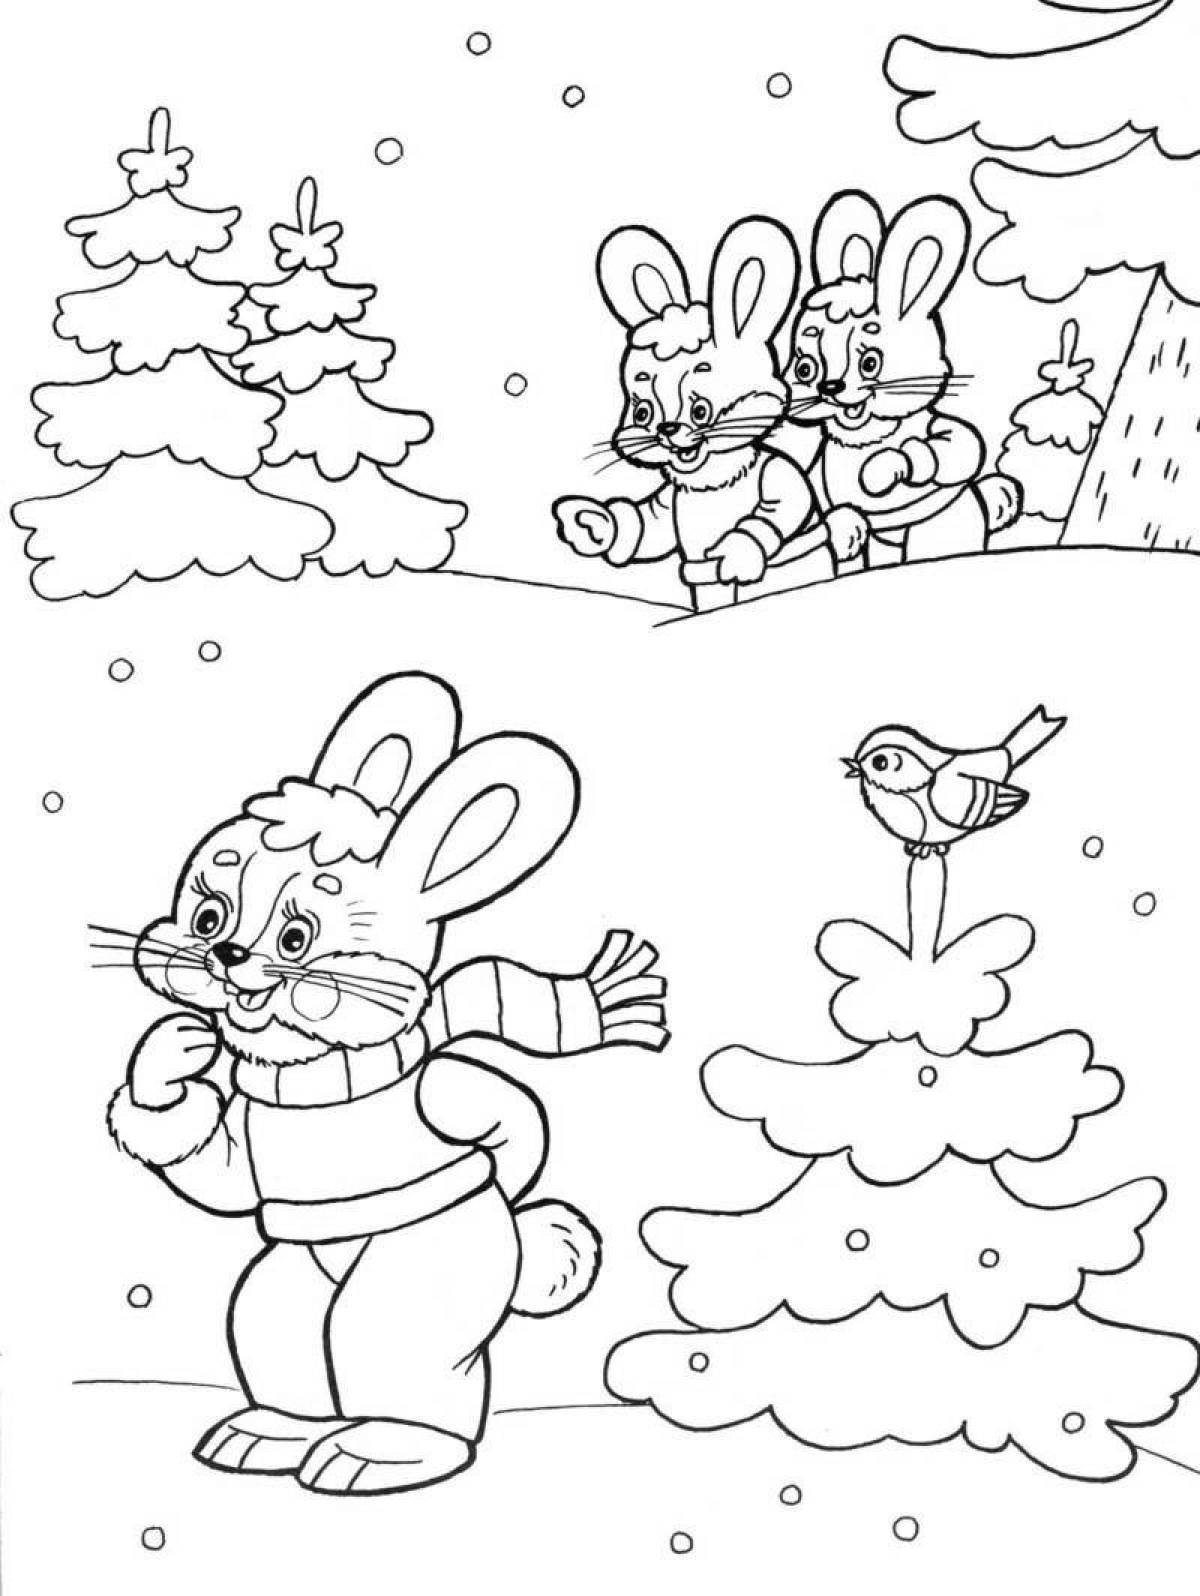 Playful Christmas tree and rabbit coloring book